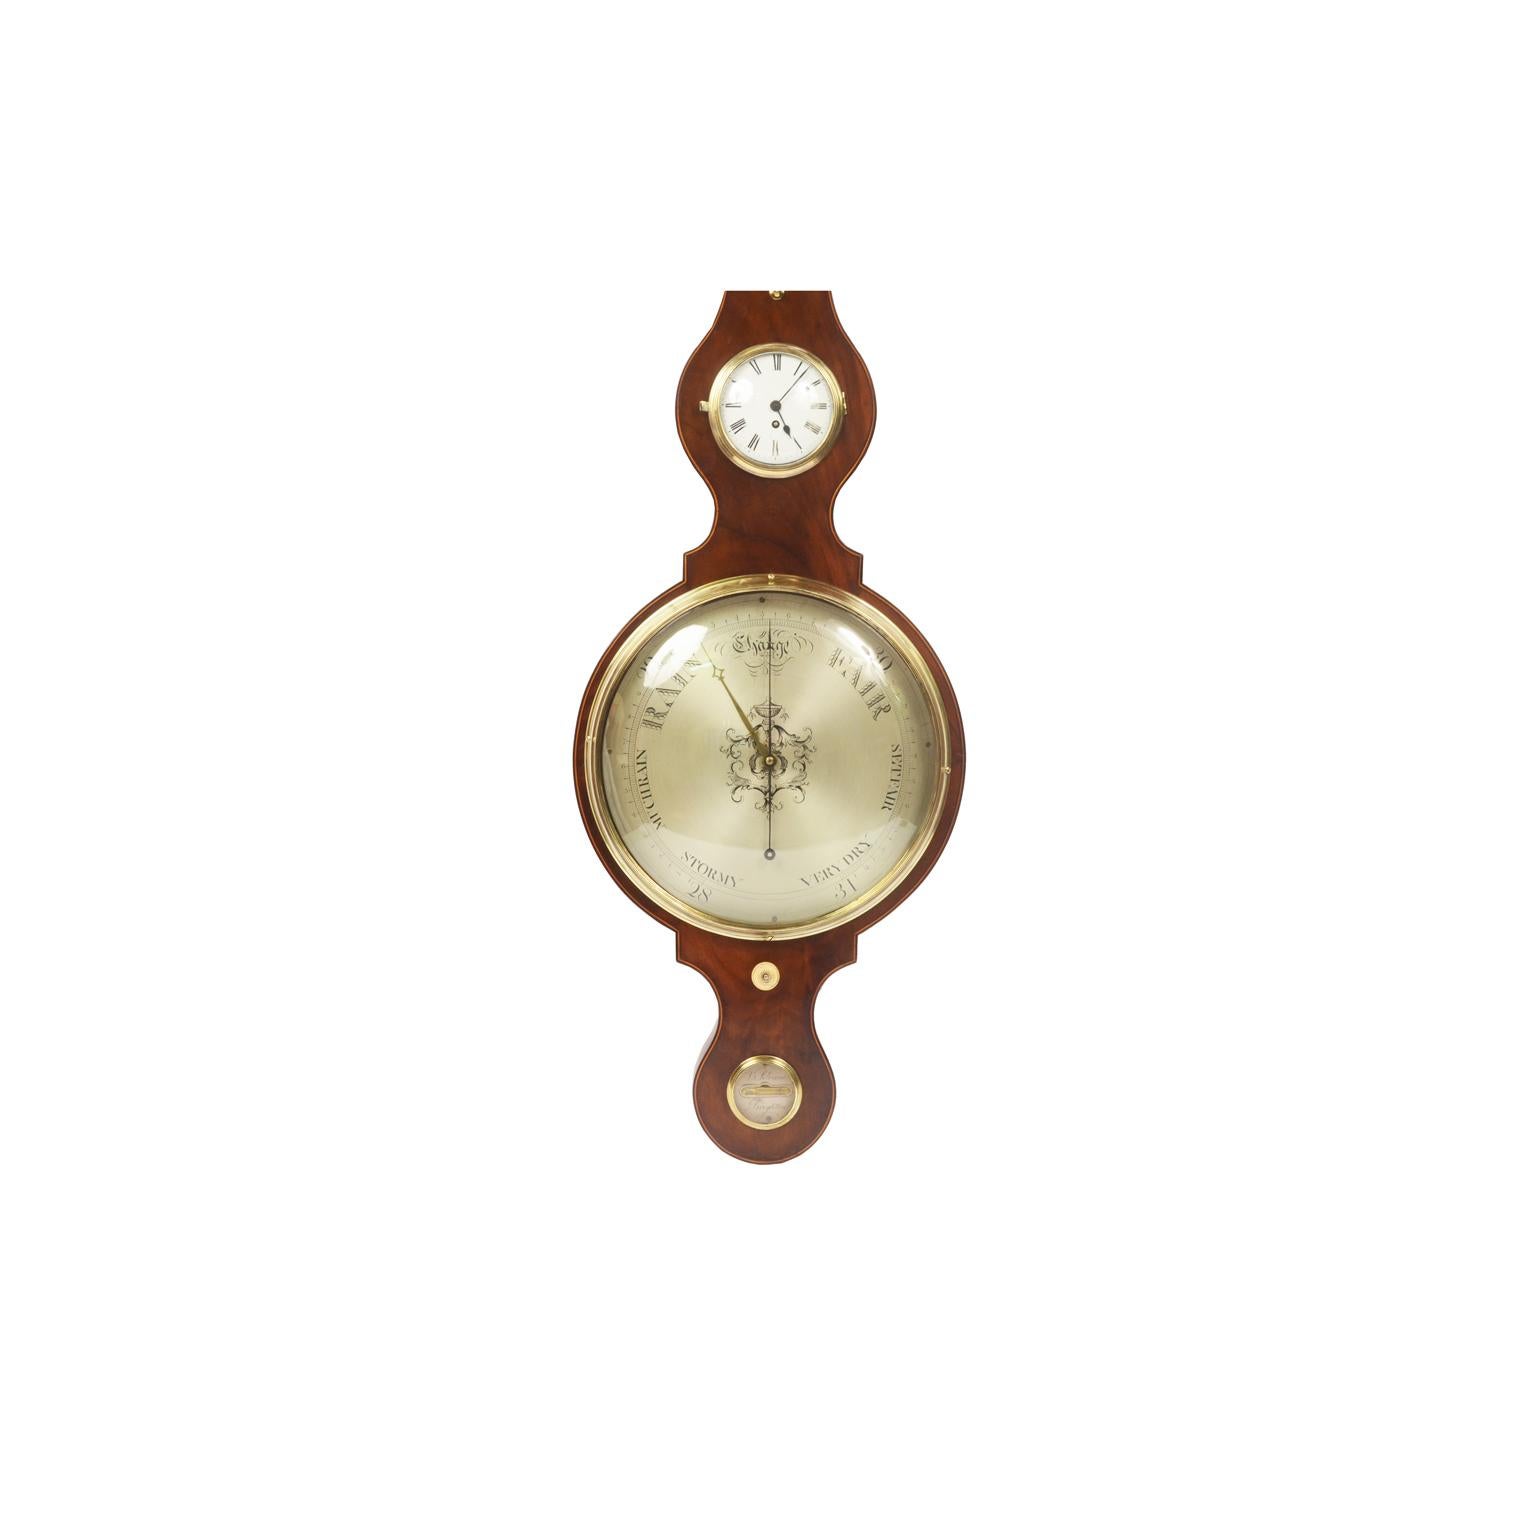 Rare large barometer complete with clock signed Silvani Brighton, dated from 1820 and 1835. Finely crafted mahogany wood case with double thread at the edges. Large silver-plated brass dial engraved with meteorological indications and double hand,